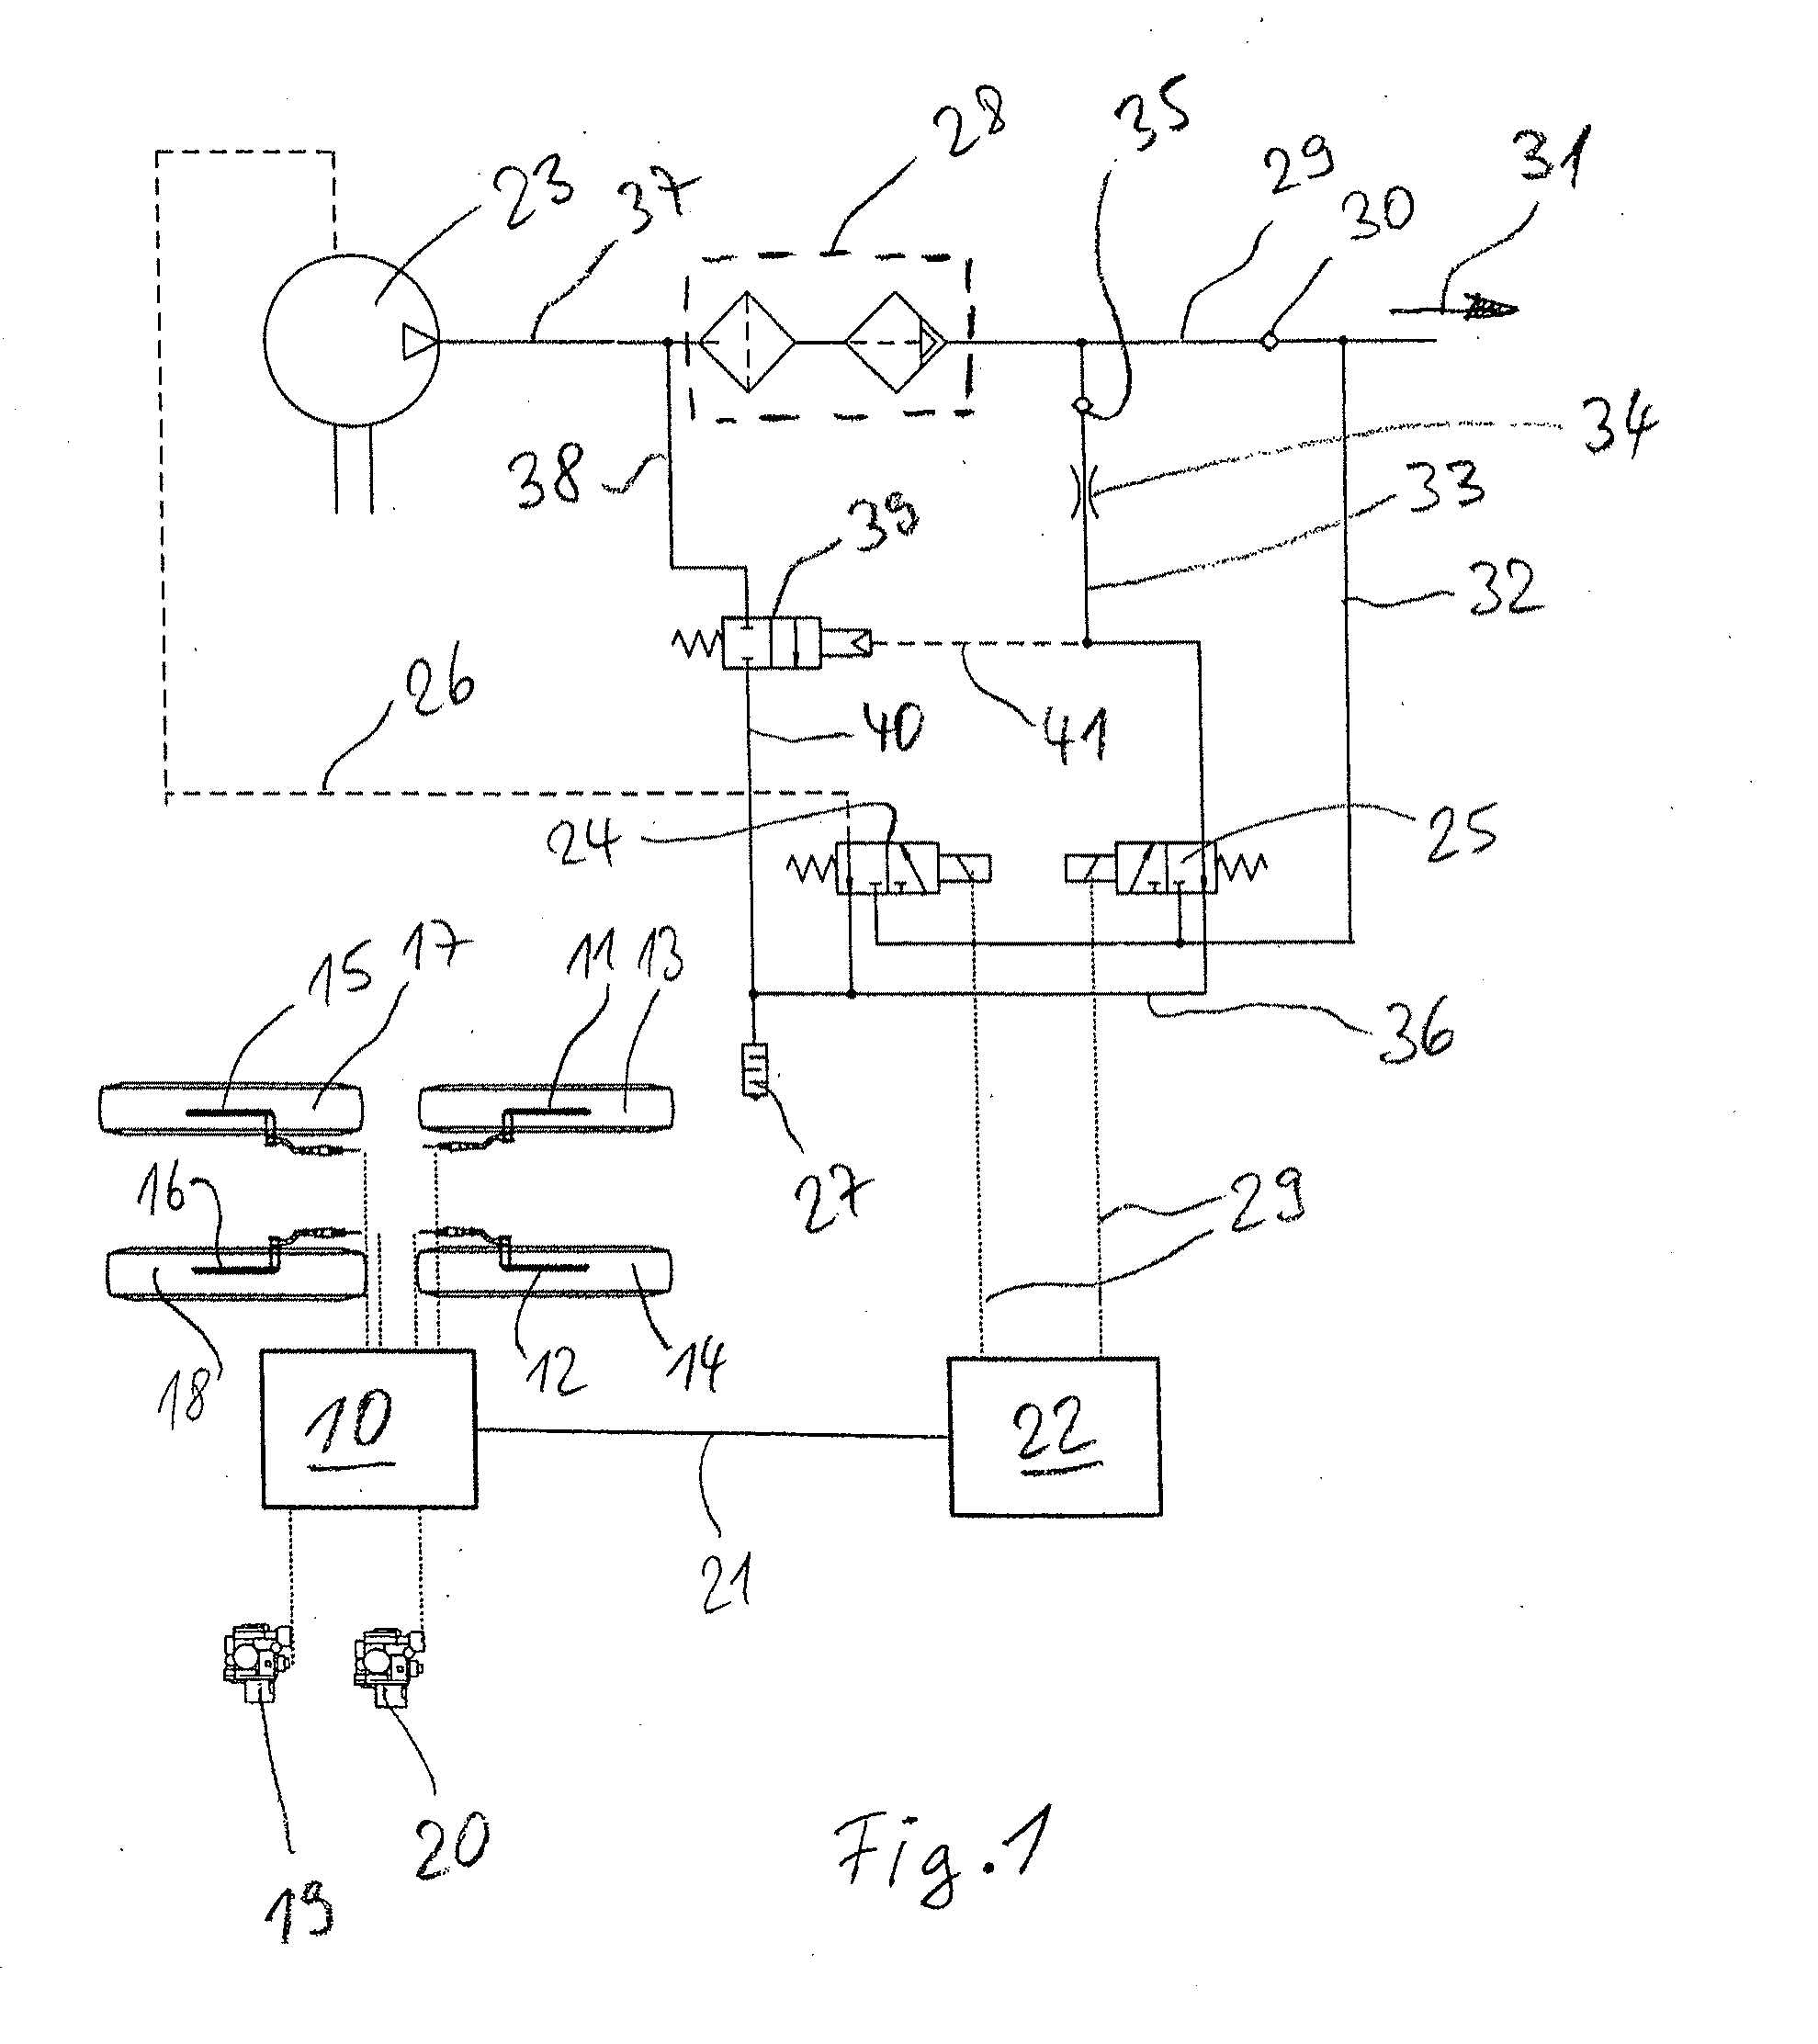 Method for Operating a Compressed Air Brake System